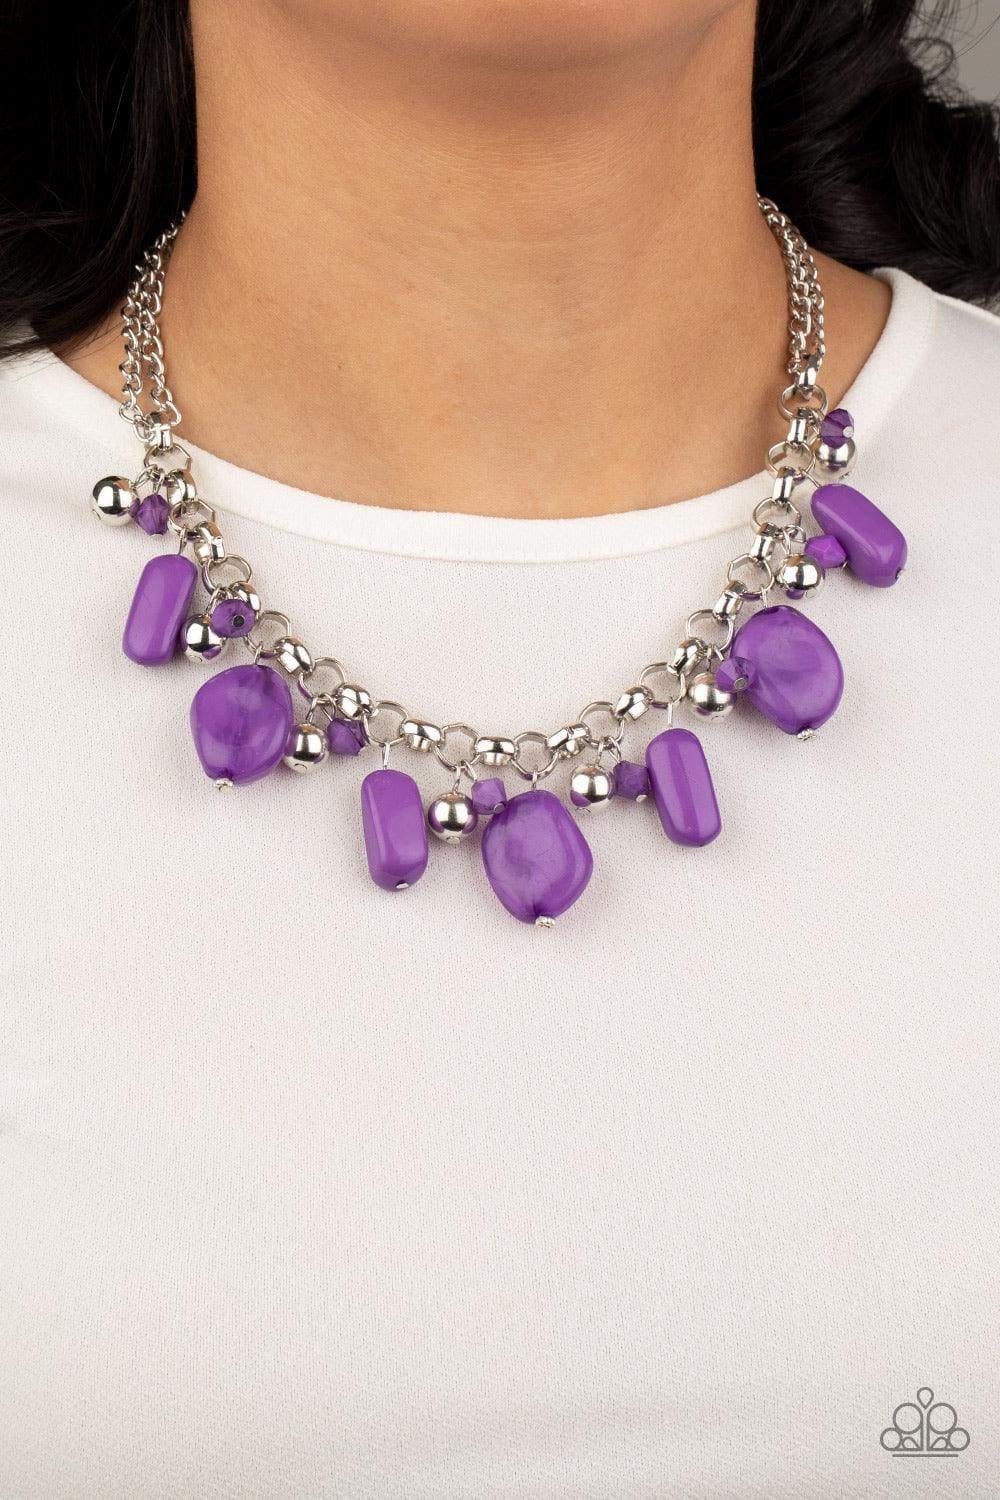 Paparazzi Accessories - Grand Canyon Grotto - Purple Neckless - Bling by JessieK